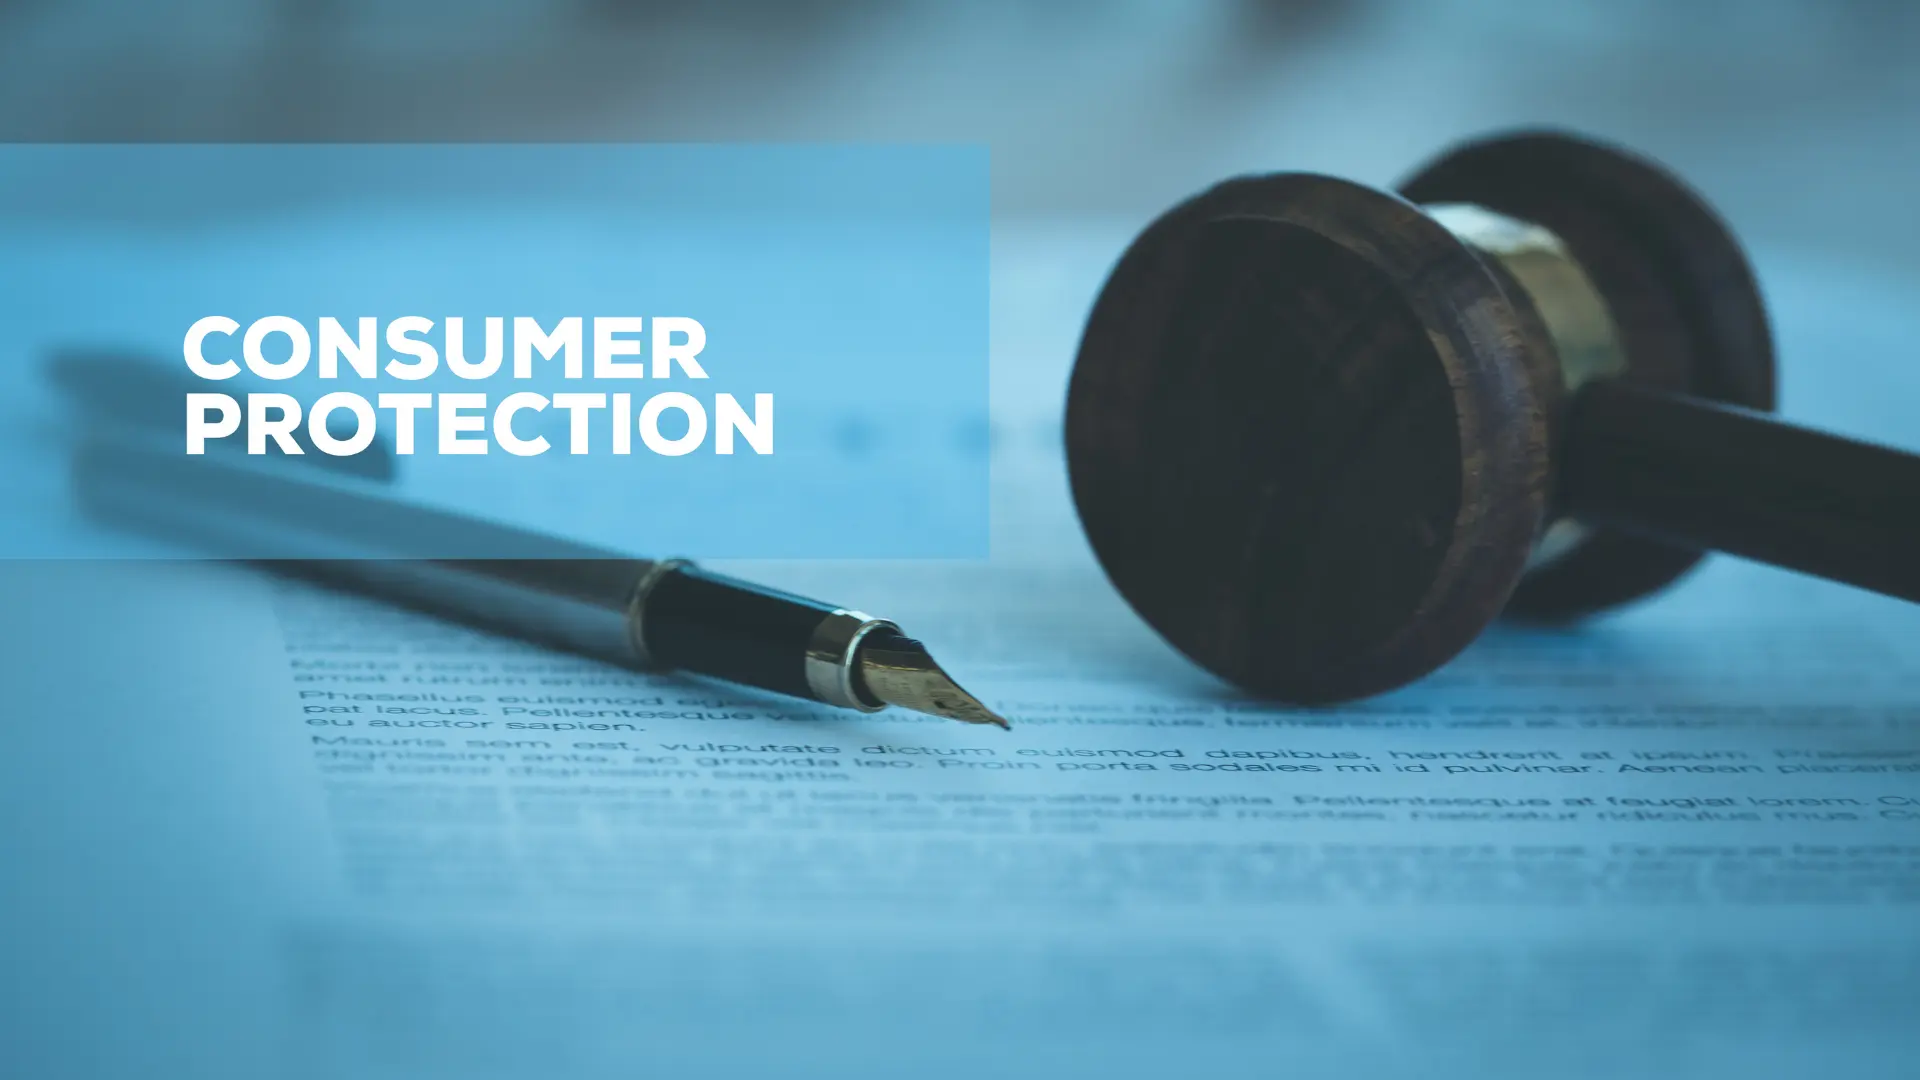 PROTECTING CONSUMER RIGHTS IN THE UAE